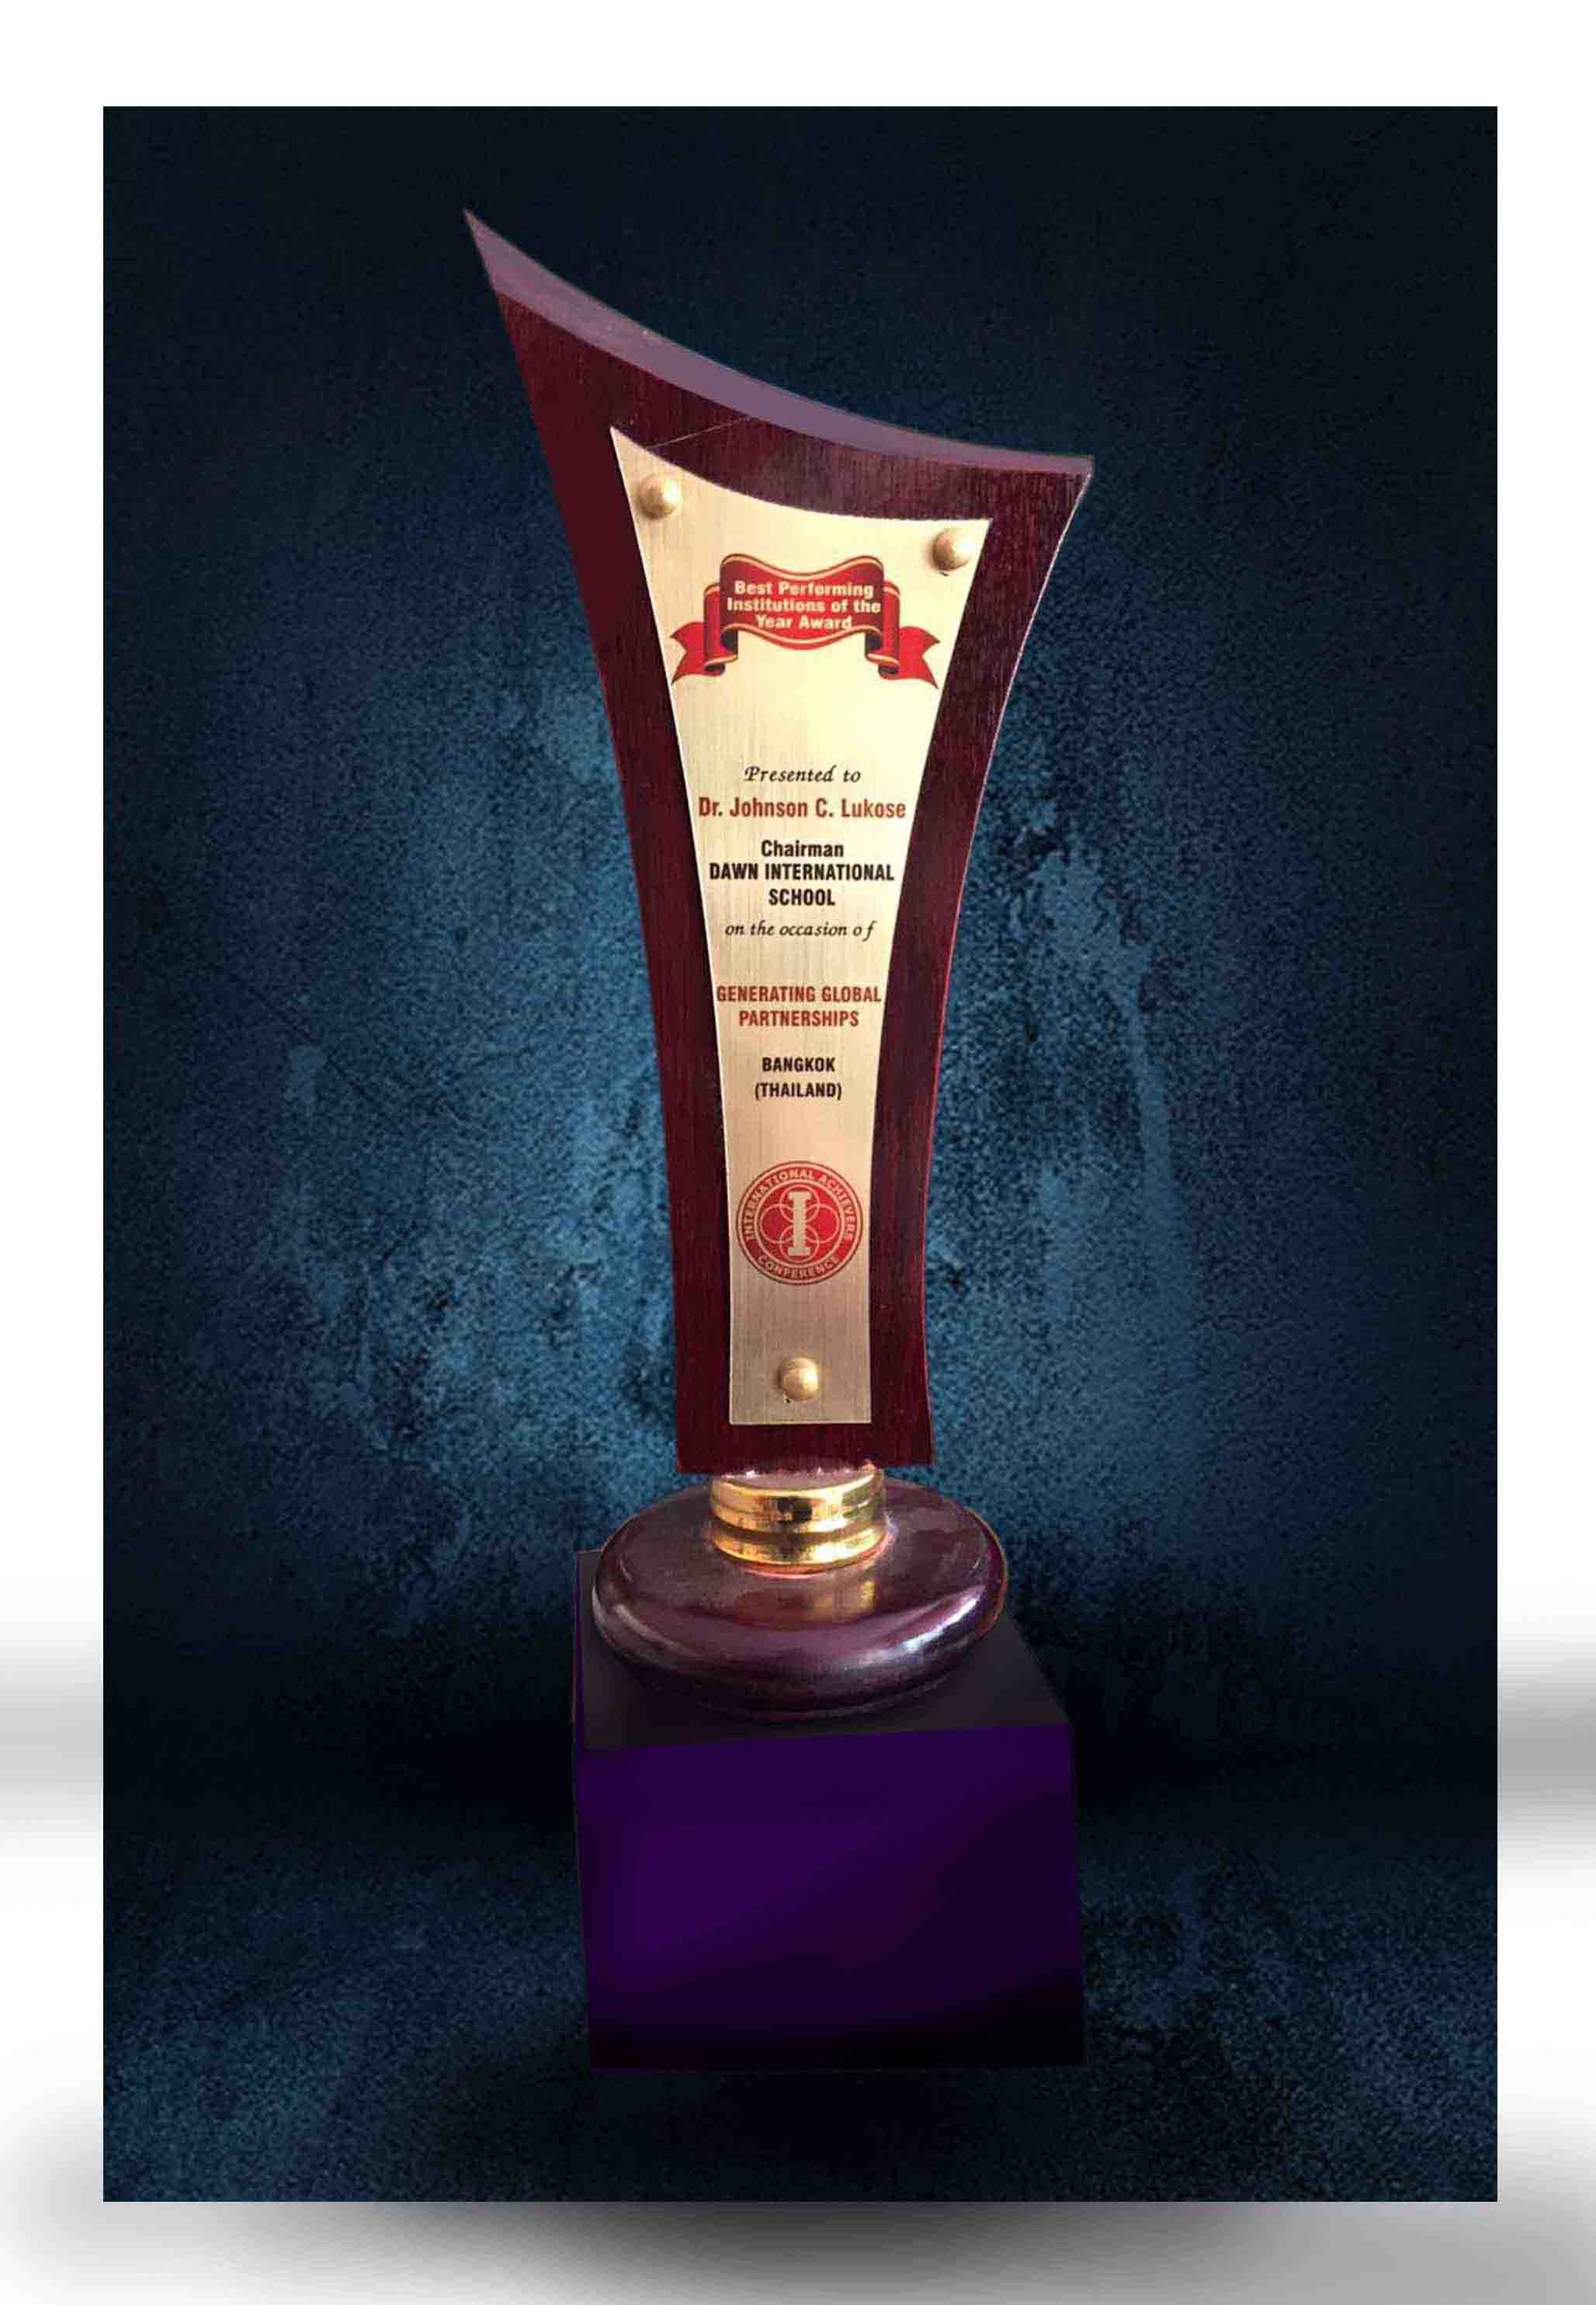 ALL INDIA ACHIEVERS FOUNDATION INDIAN LEADERSHIP AWARD FOR EDUCATION EXCELLENCE